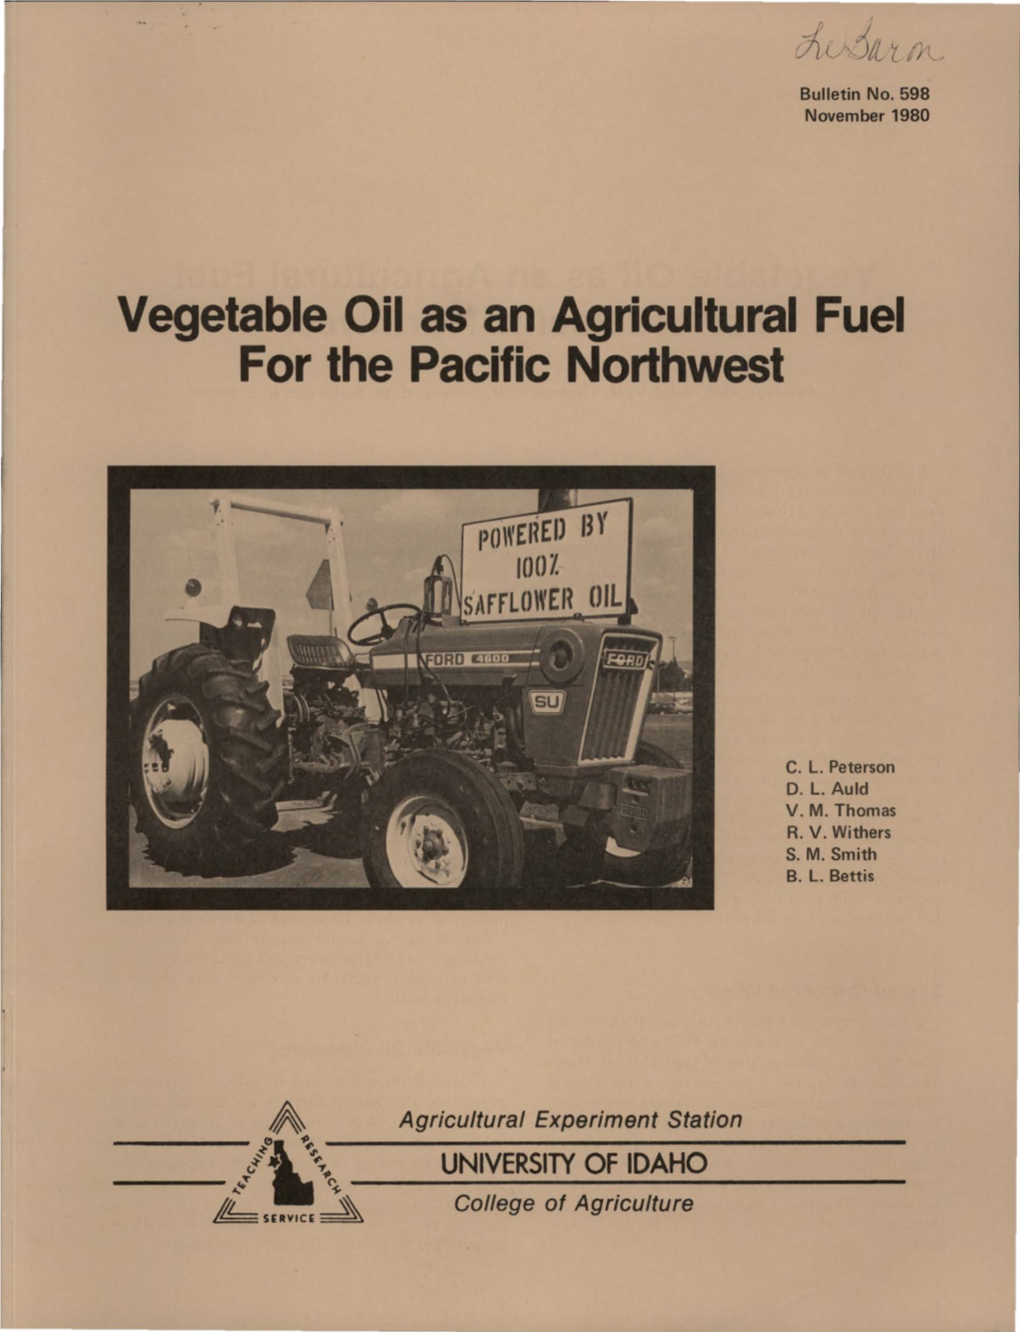 Vegetable Oil As an Agricultural Fuel for the Pacific Northwest